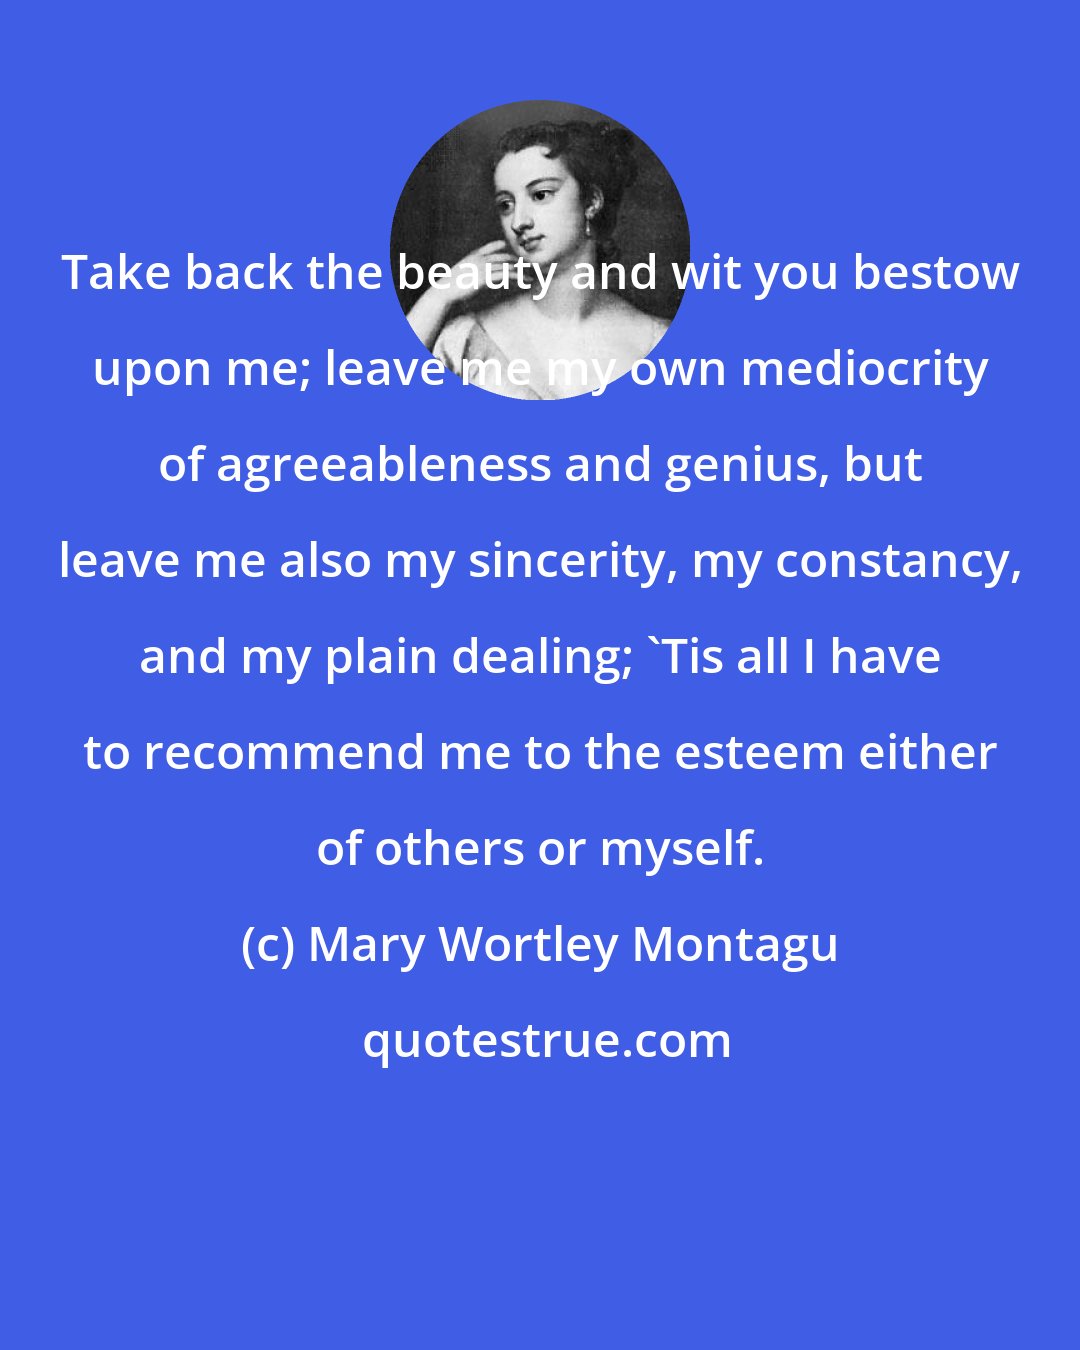 Mary Wortley Montagu: Take back the beauty and wit you bestow upon me; leave me my own mediocrity of agreeableness and genius, but leave me also my sincerity, my constancy, and my plain dealing; 'Tis all I have to recommend me to the esteem either of others or myself.